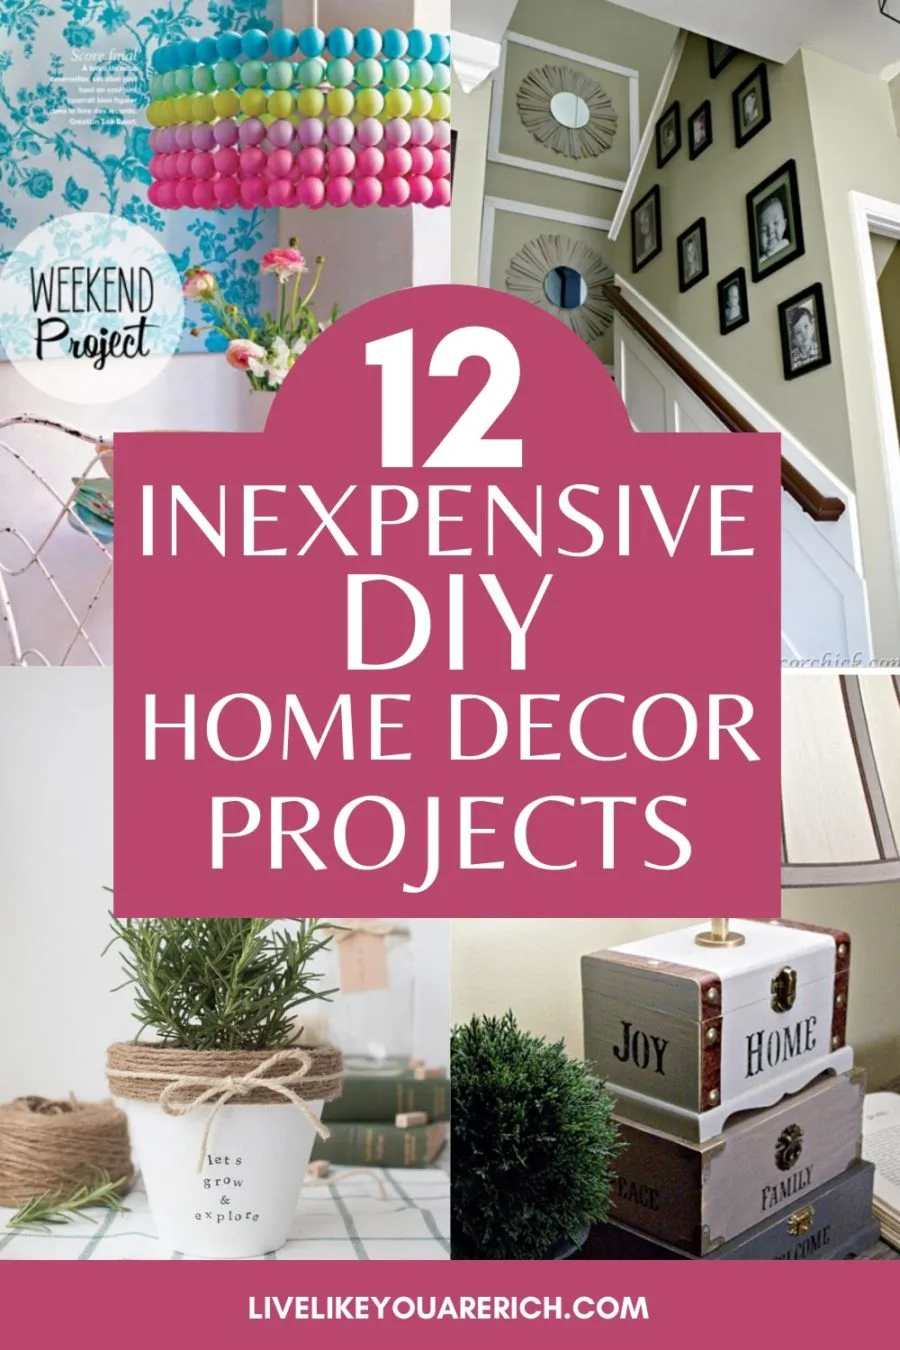 You don’t have to spend a fortune decorating your home beautifully. Here is a proof of this! Check out these amazing ideas of how you can create quality home decor items inexpensively. #homedecor #diy #decorating